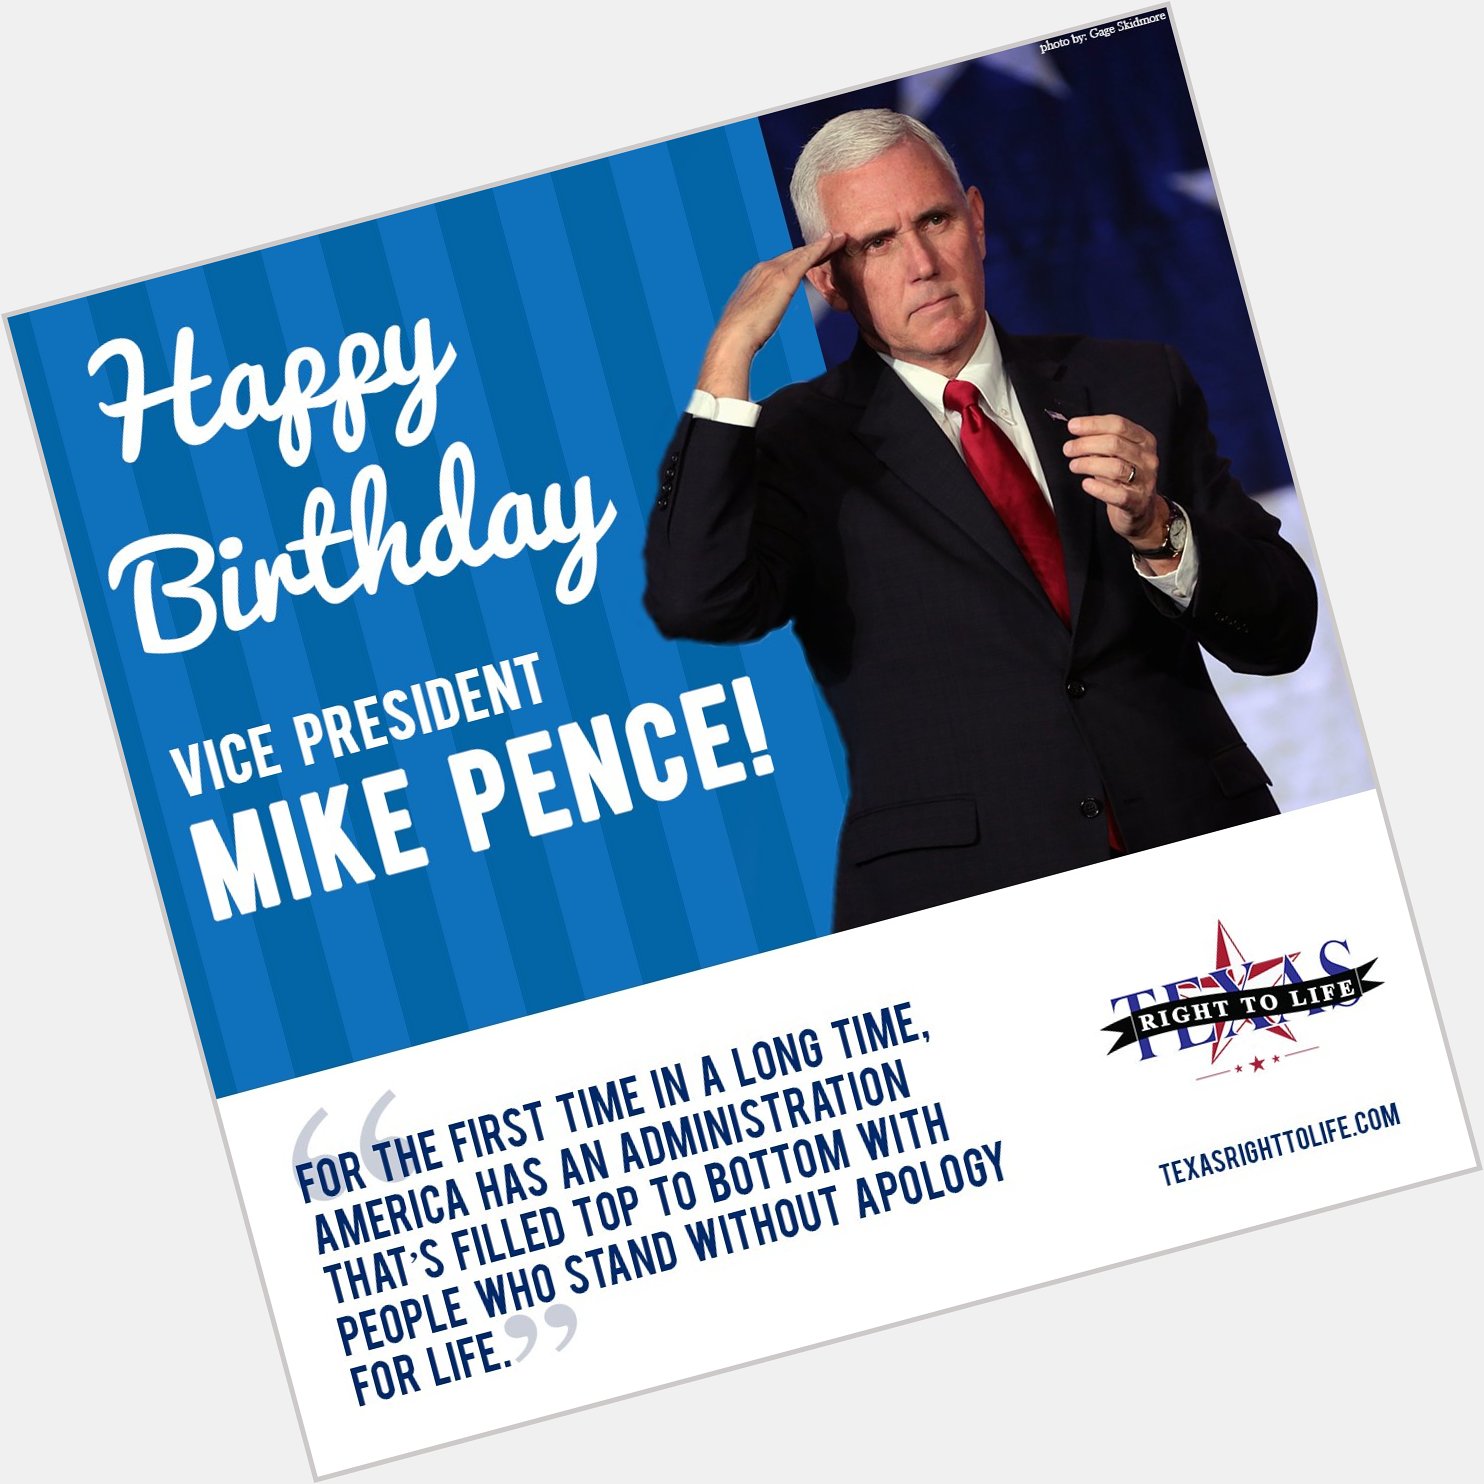 Join us in wishing Vice President Mike Pence a Happy Birthday! 